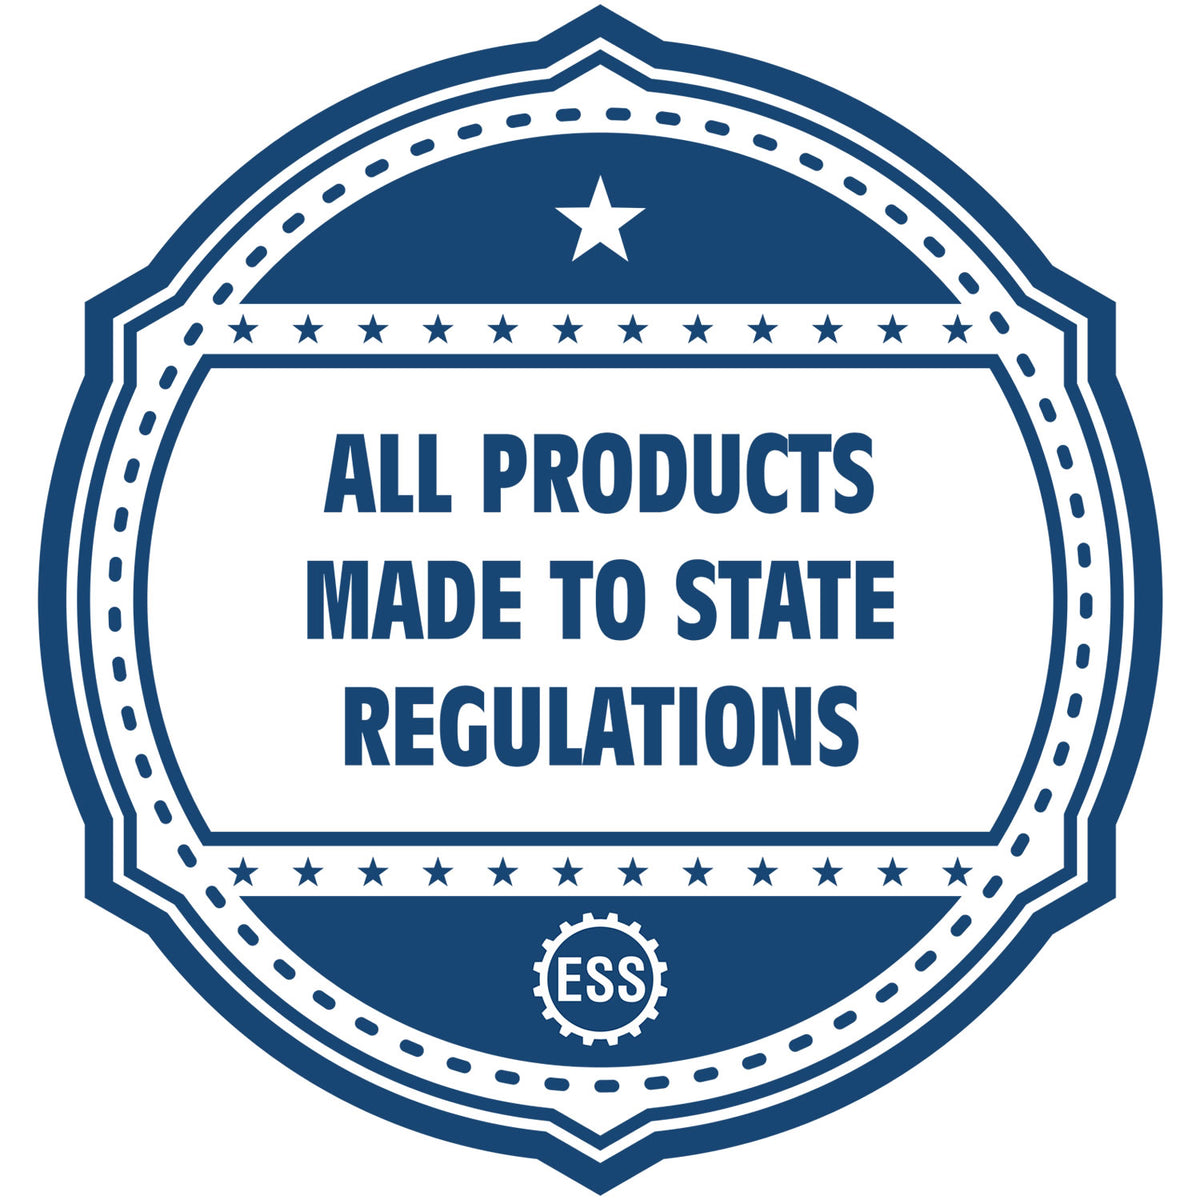 An icon or badge element for the Wooden Handle Arkansas Rectangular Notary Public Stamp showing that this product is made in compliance with state regulations.